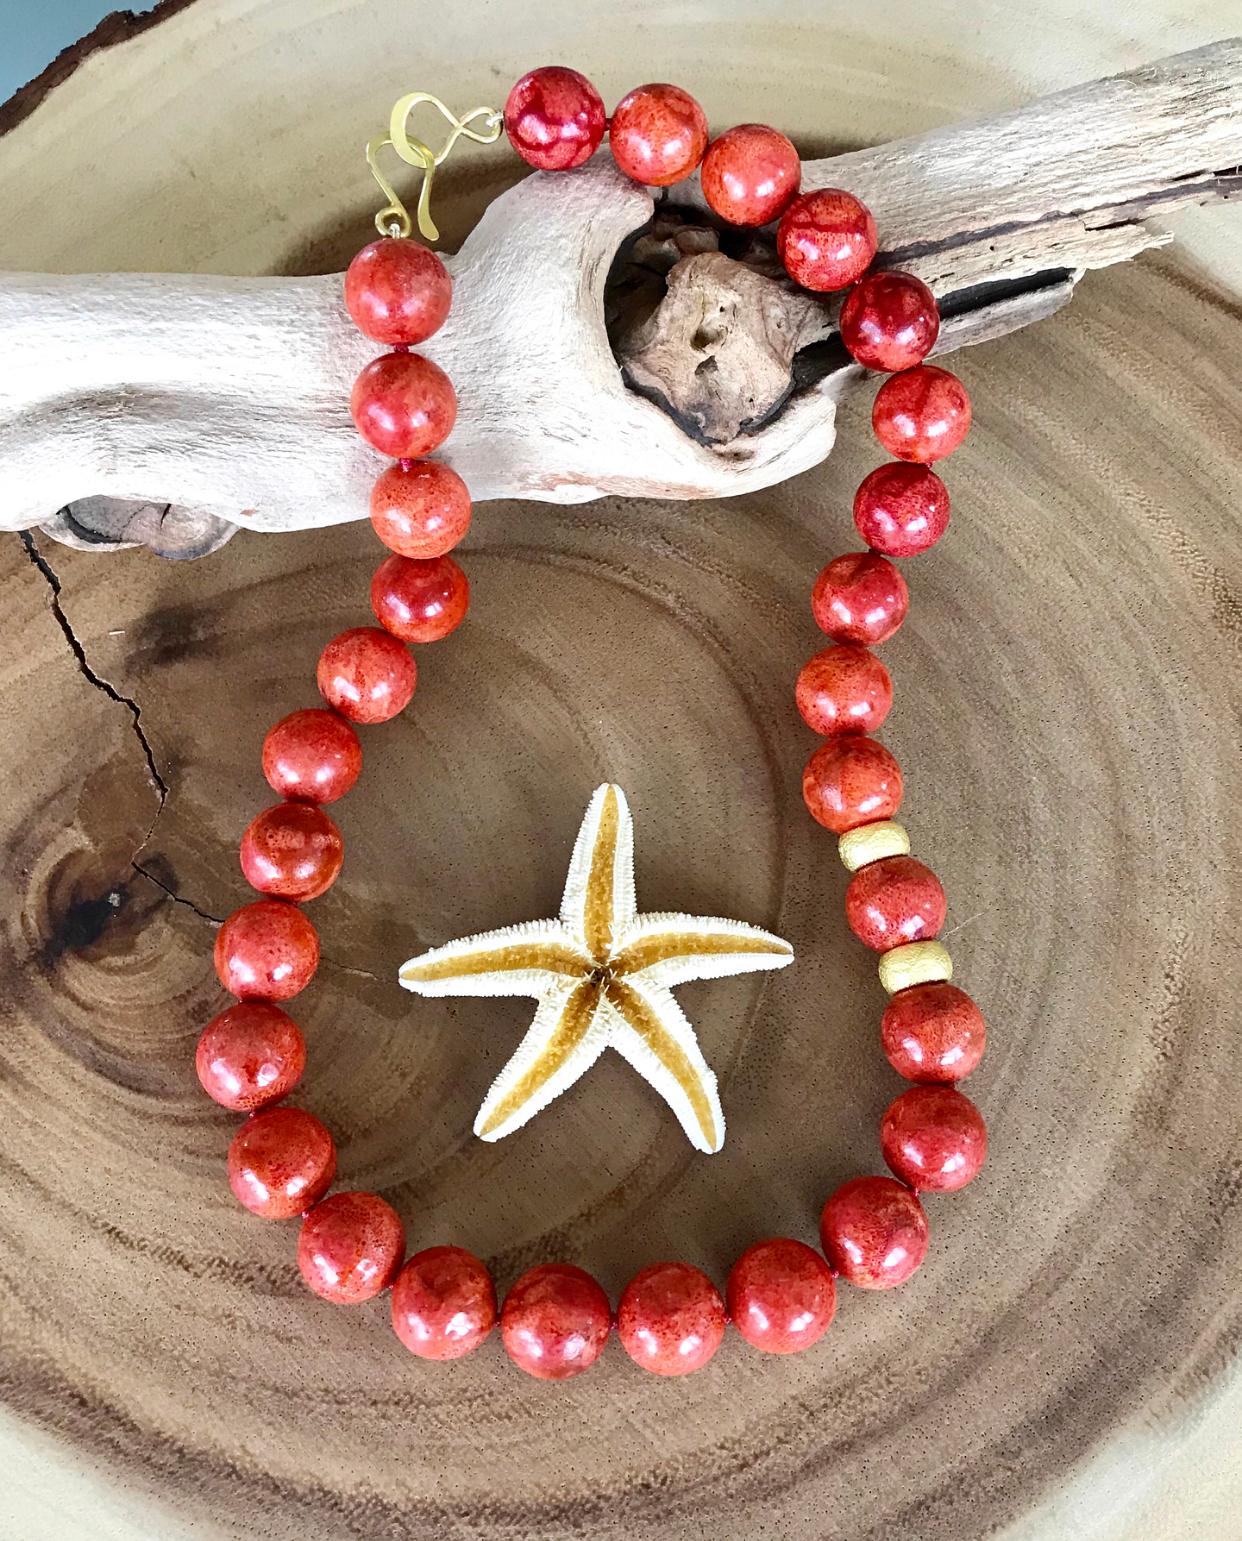 This bold and elegant Joon Han orange coral bead necklace makes a colorful statement. Simple yet luxurious, these vibrant, big orange beads are the perfect color to accent any outfit.

Joon Han is a contemporary collection of luxurious, elegant and